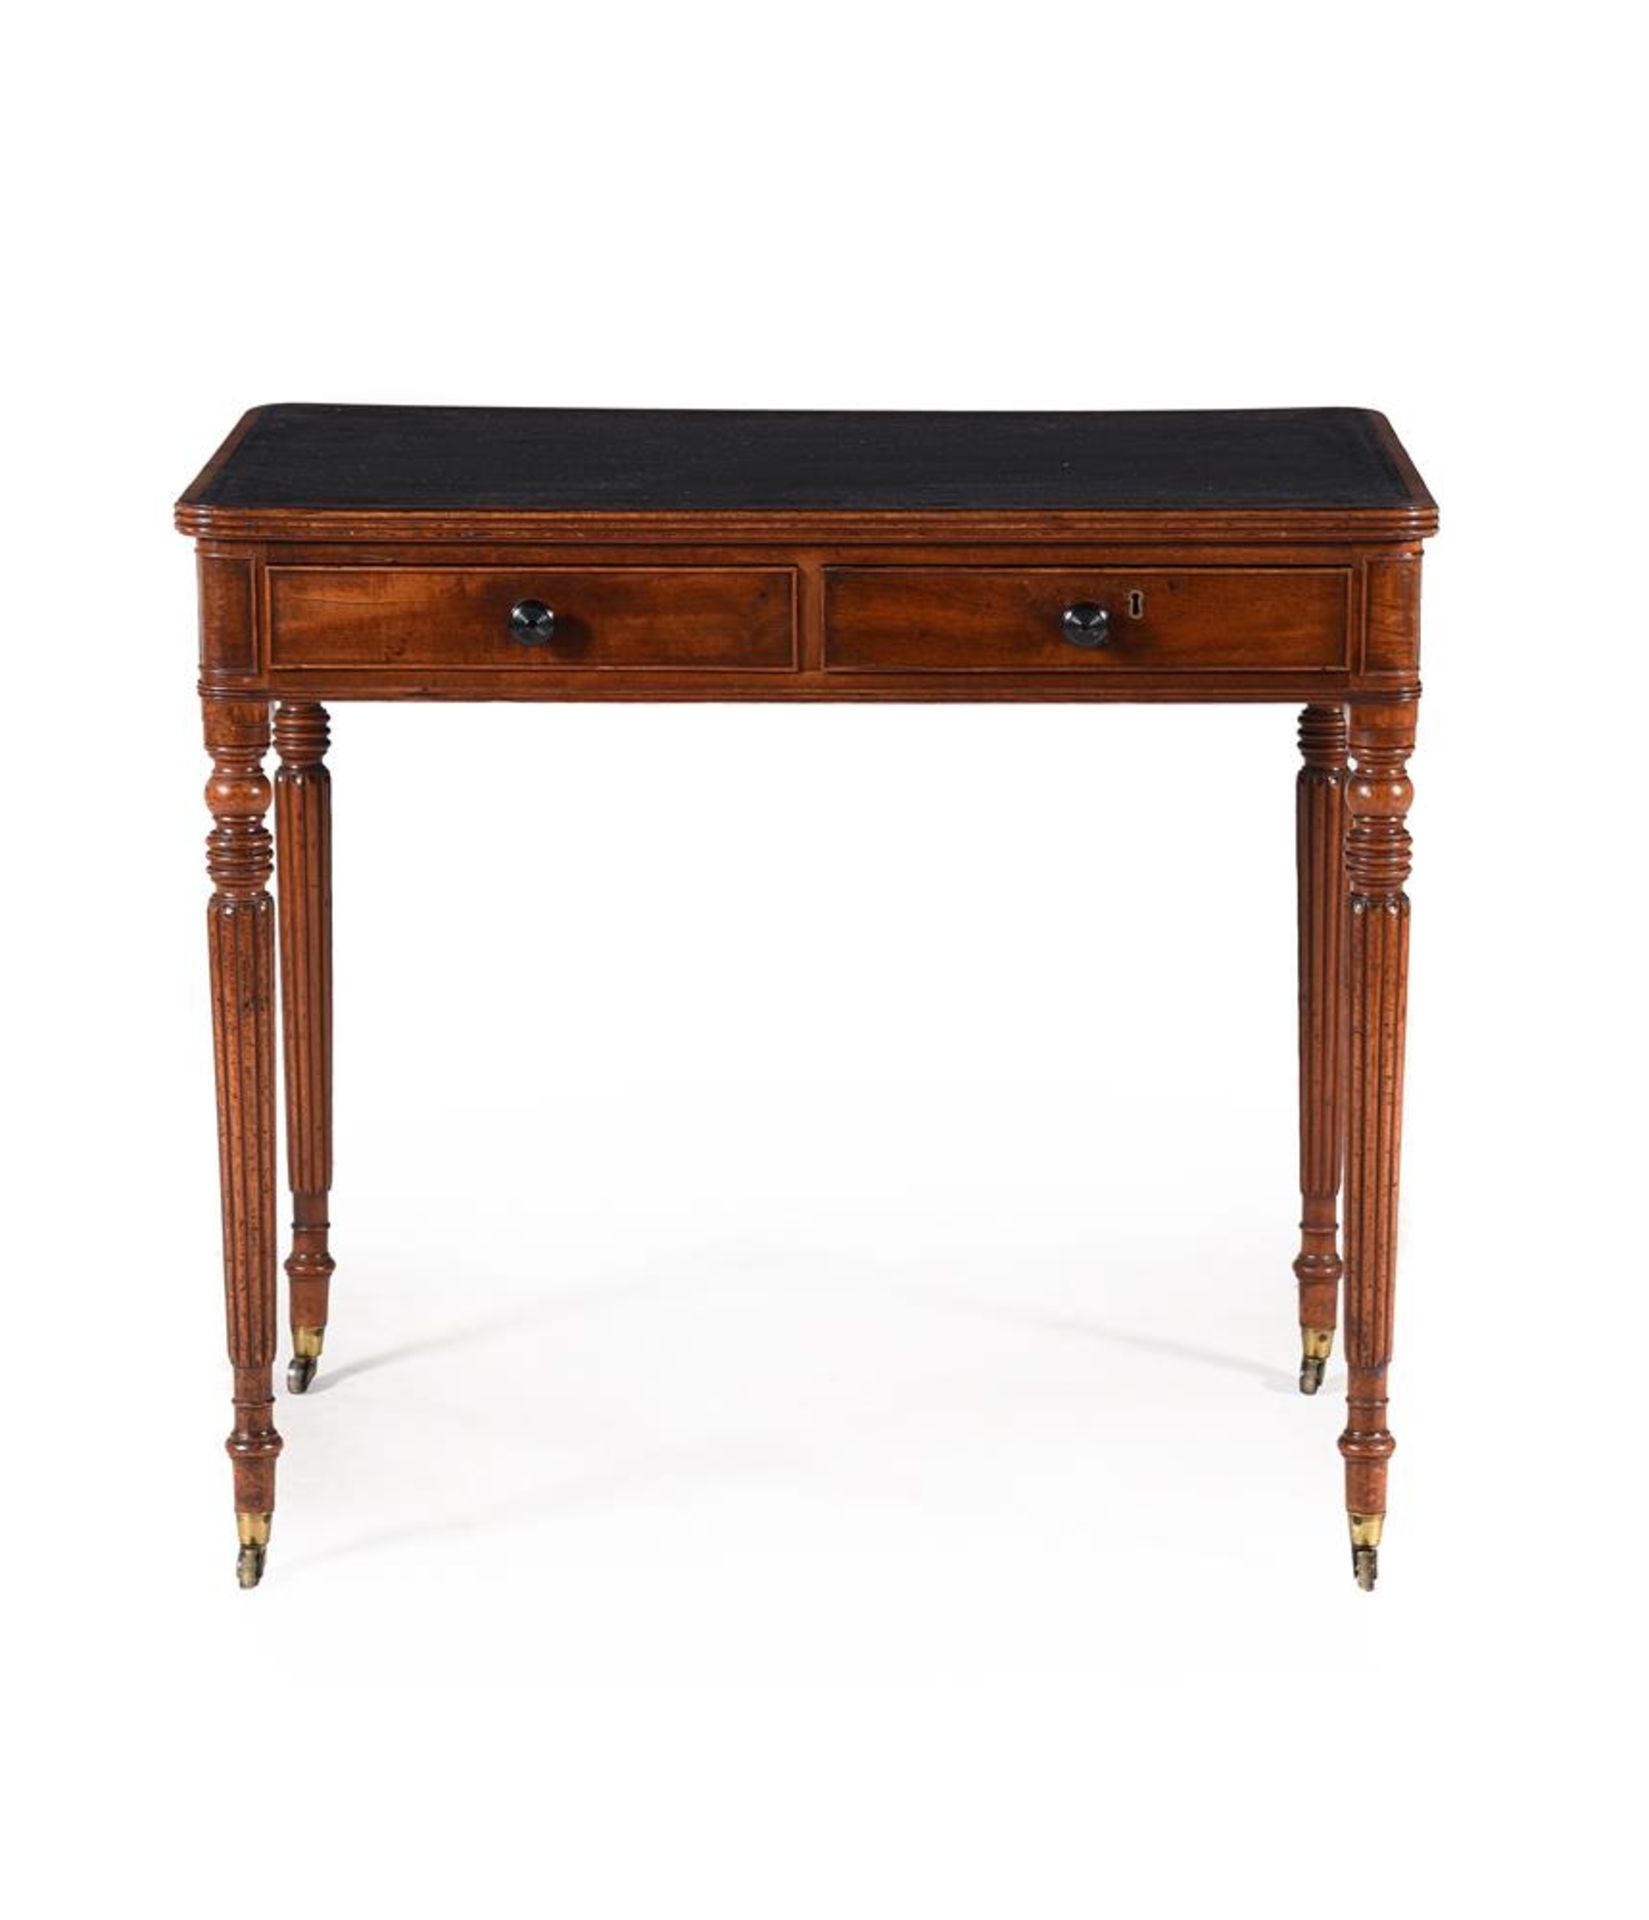 Y A REGENCY WRITING TABLE, IN THE MANNER OF GILLOWS, CIRCA 1820